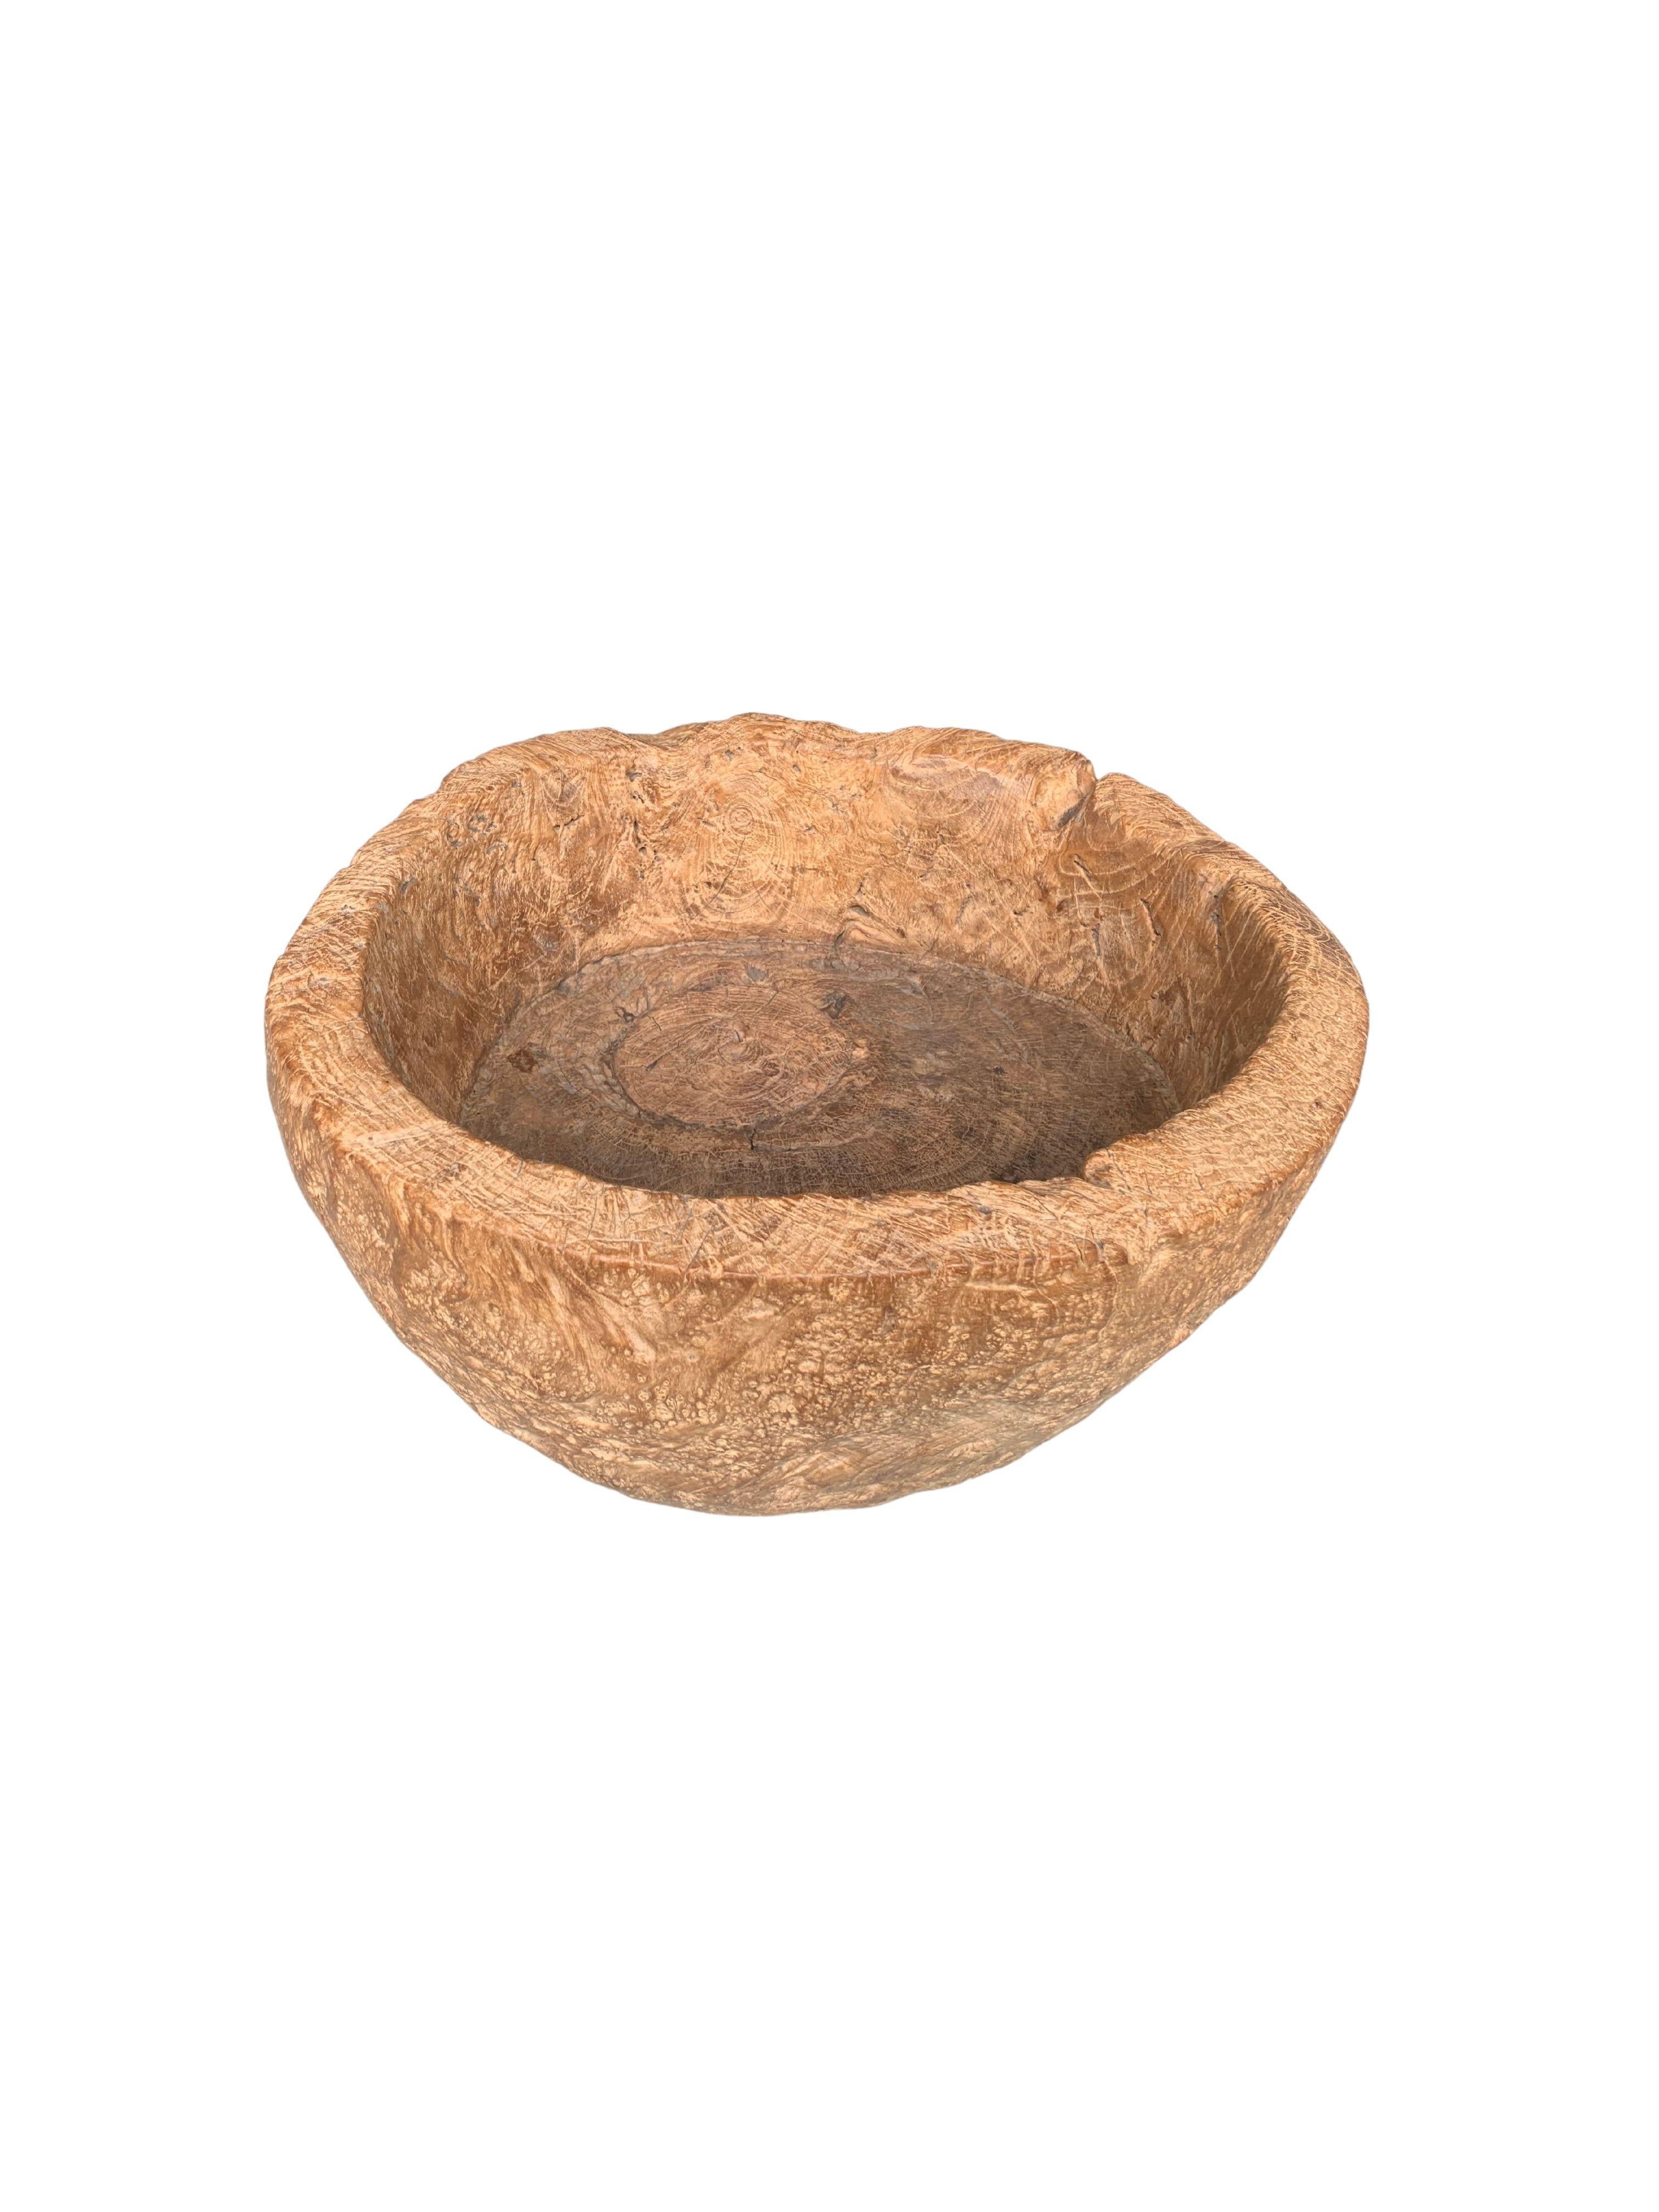 Other Vintage Solid Teak Wood Bowl from Java, Indonesia For Sale